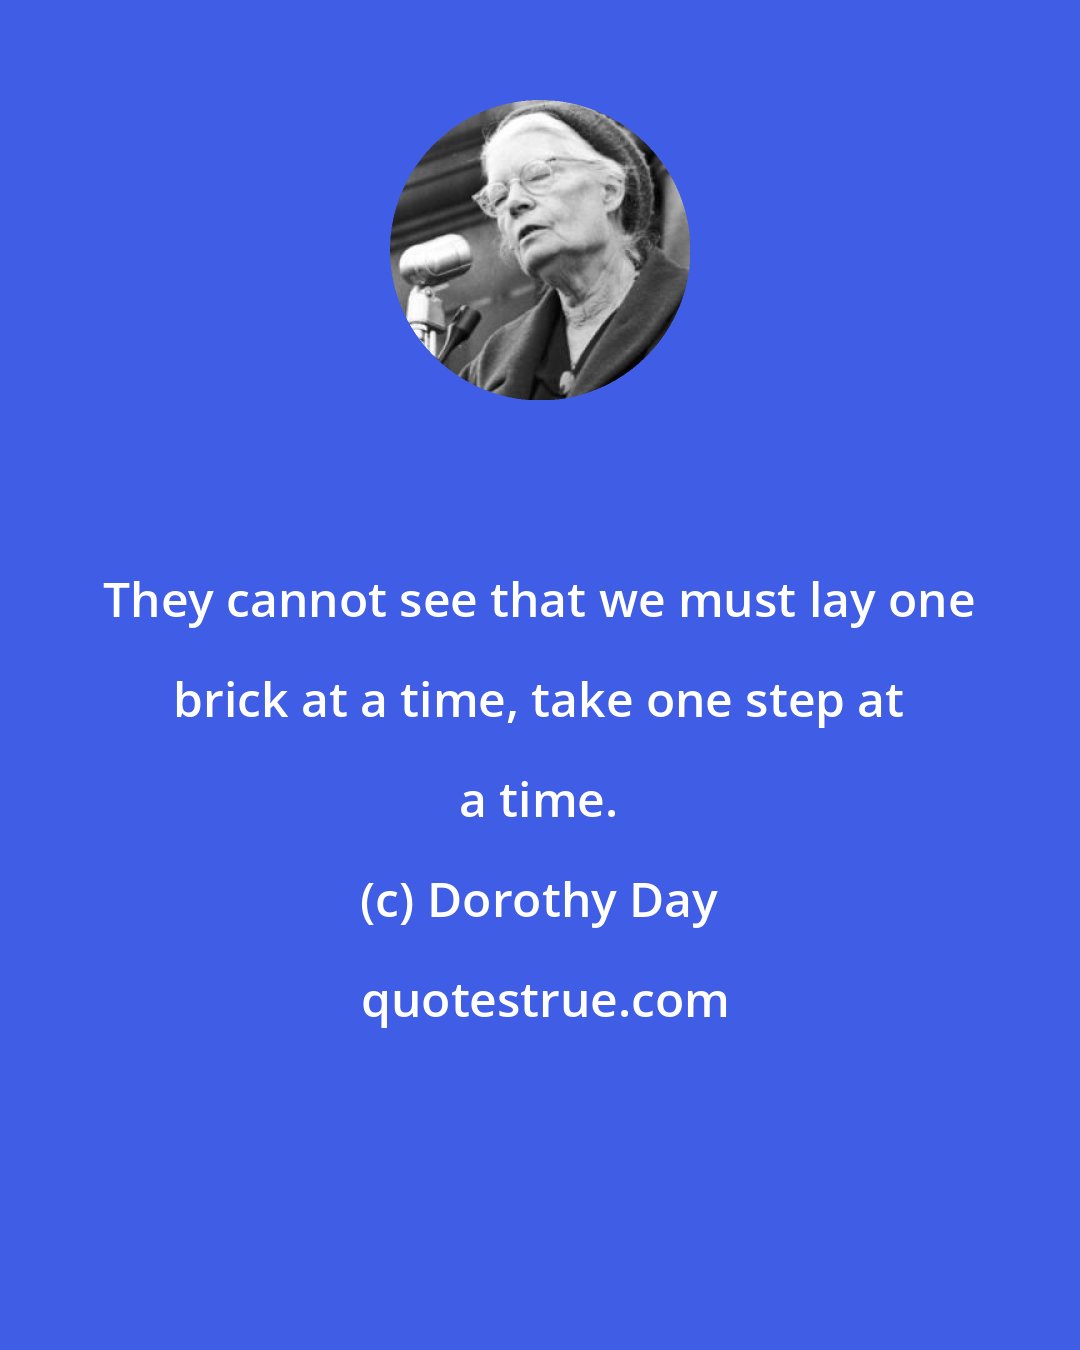 Dorothy Day: They cannot see that we must lay one brick at a time, take one step at a time.